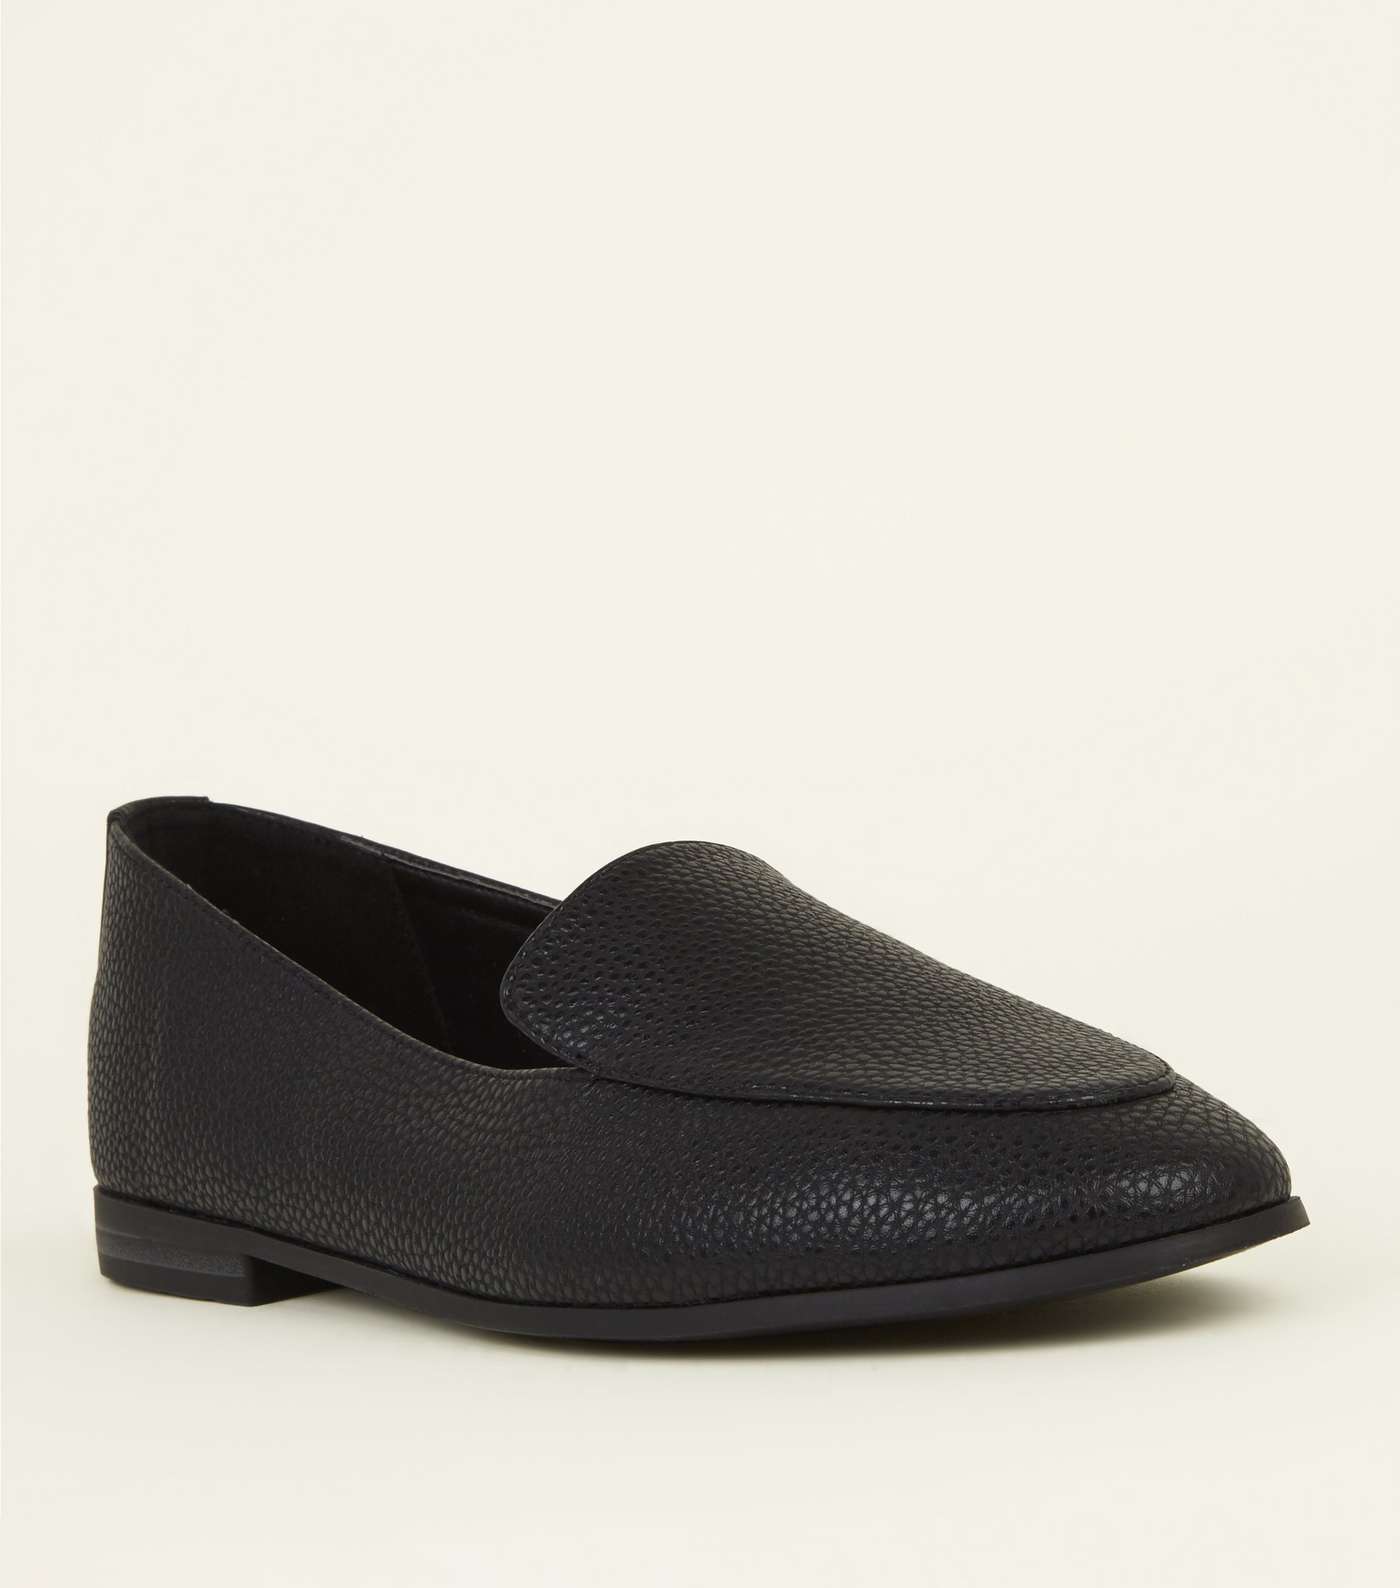 Black Leather-Look Loafers